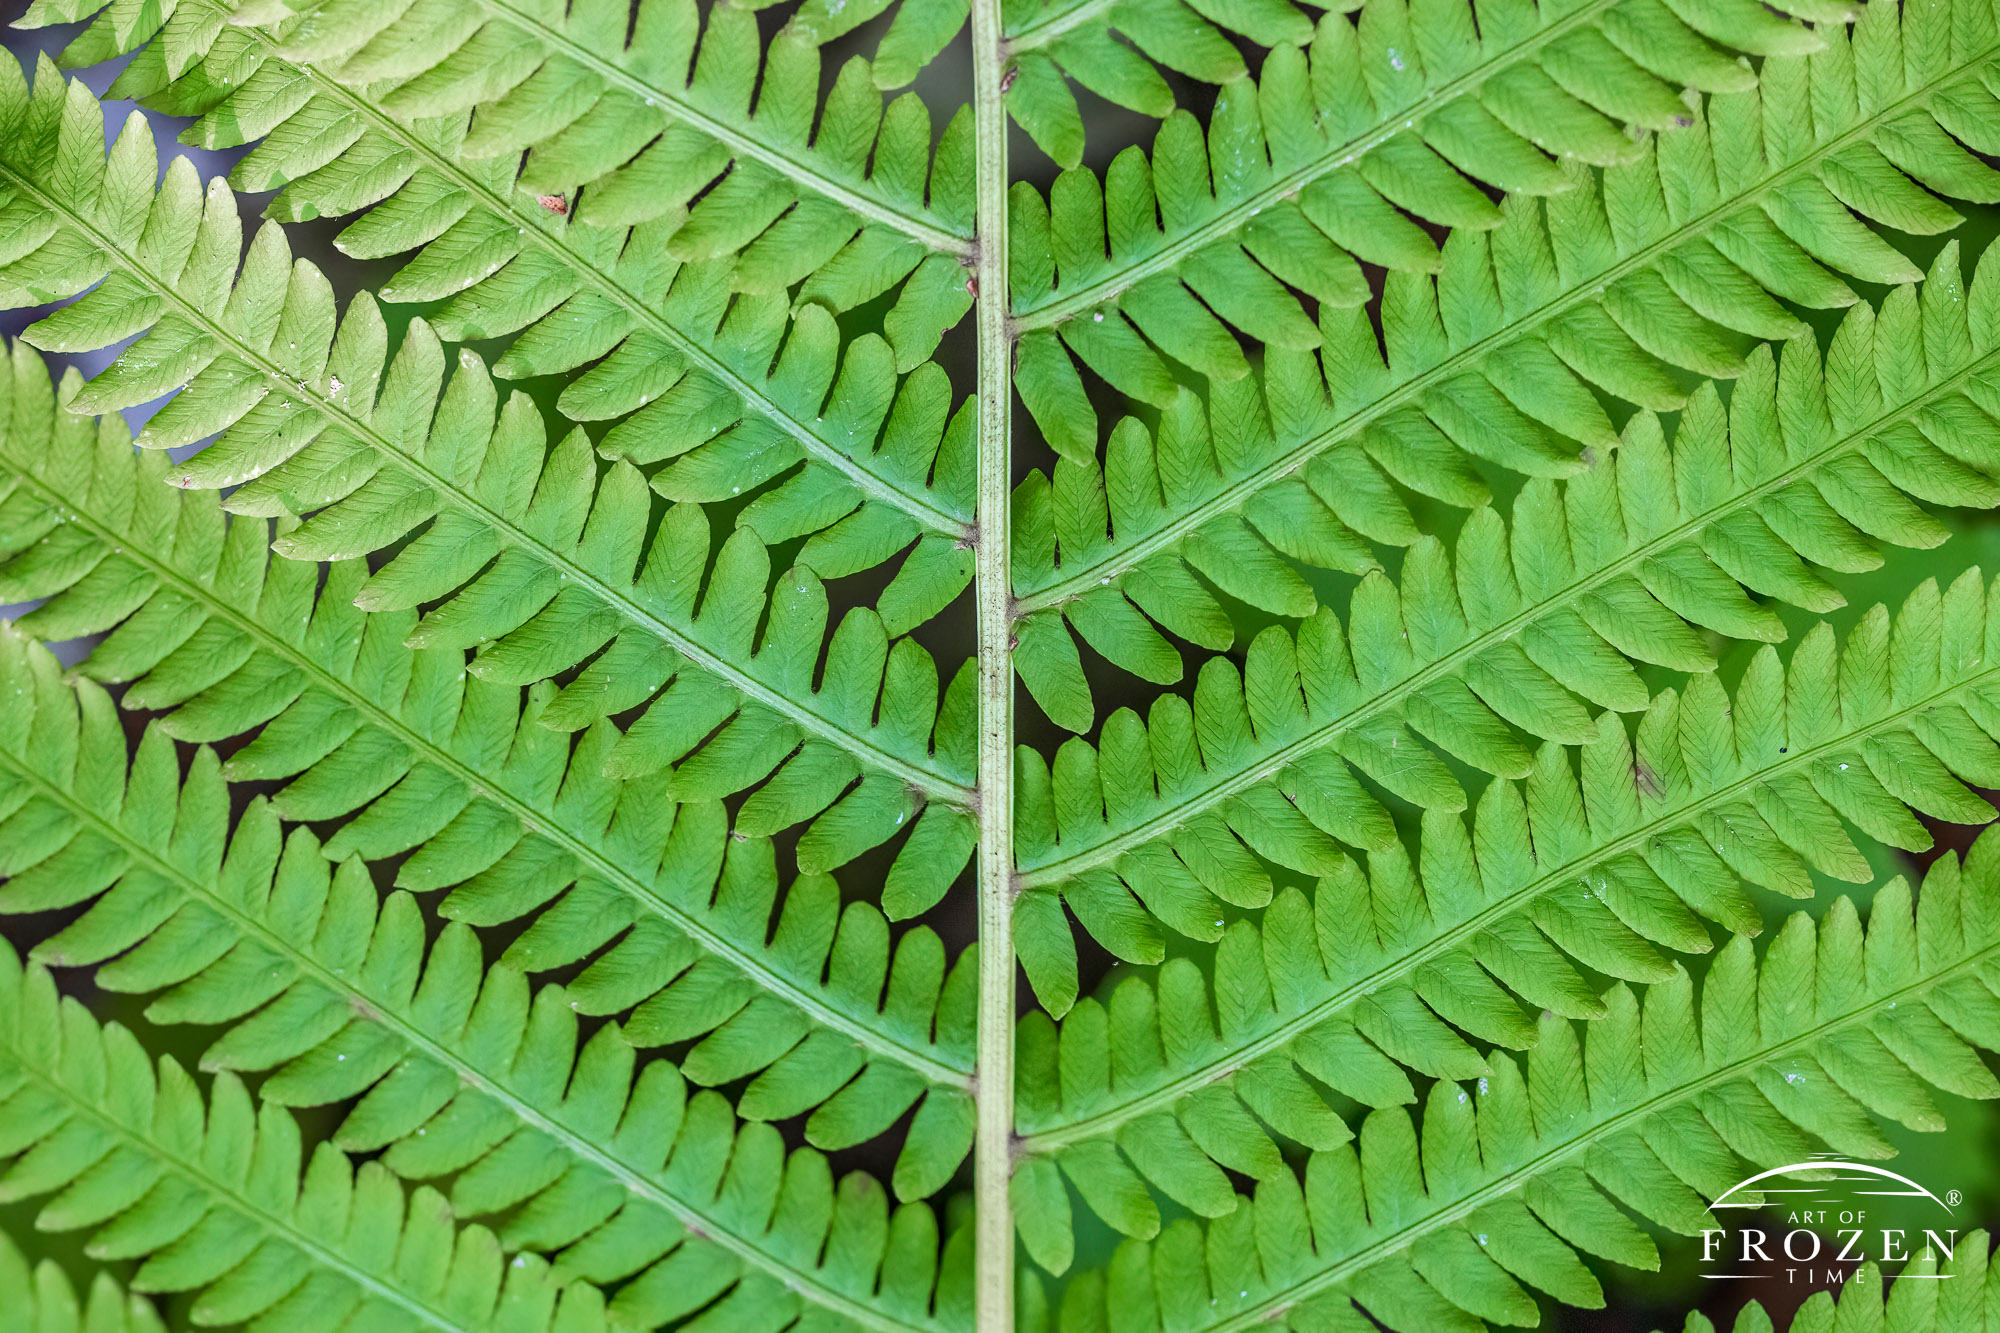 A close up view of a Silvery Spleenwort fern which emphasizes its repeating patterns